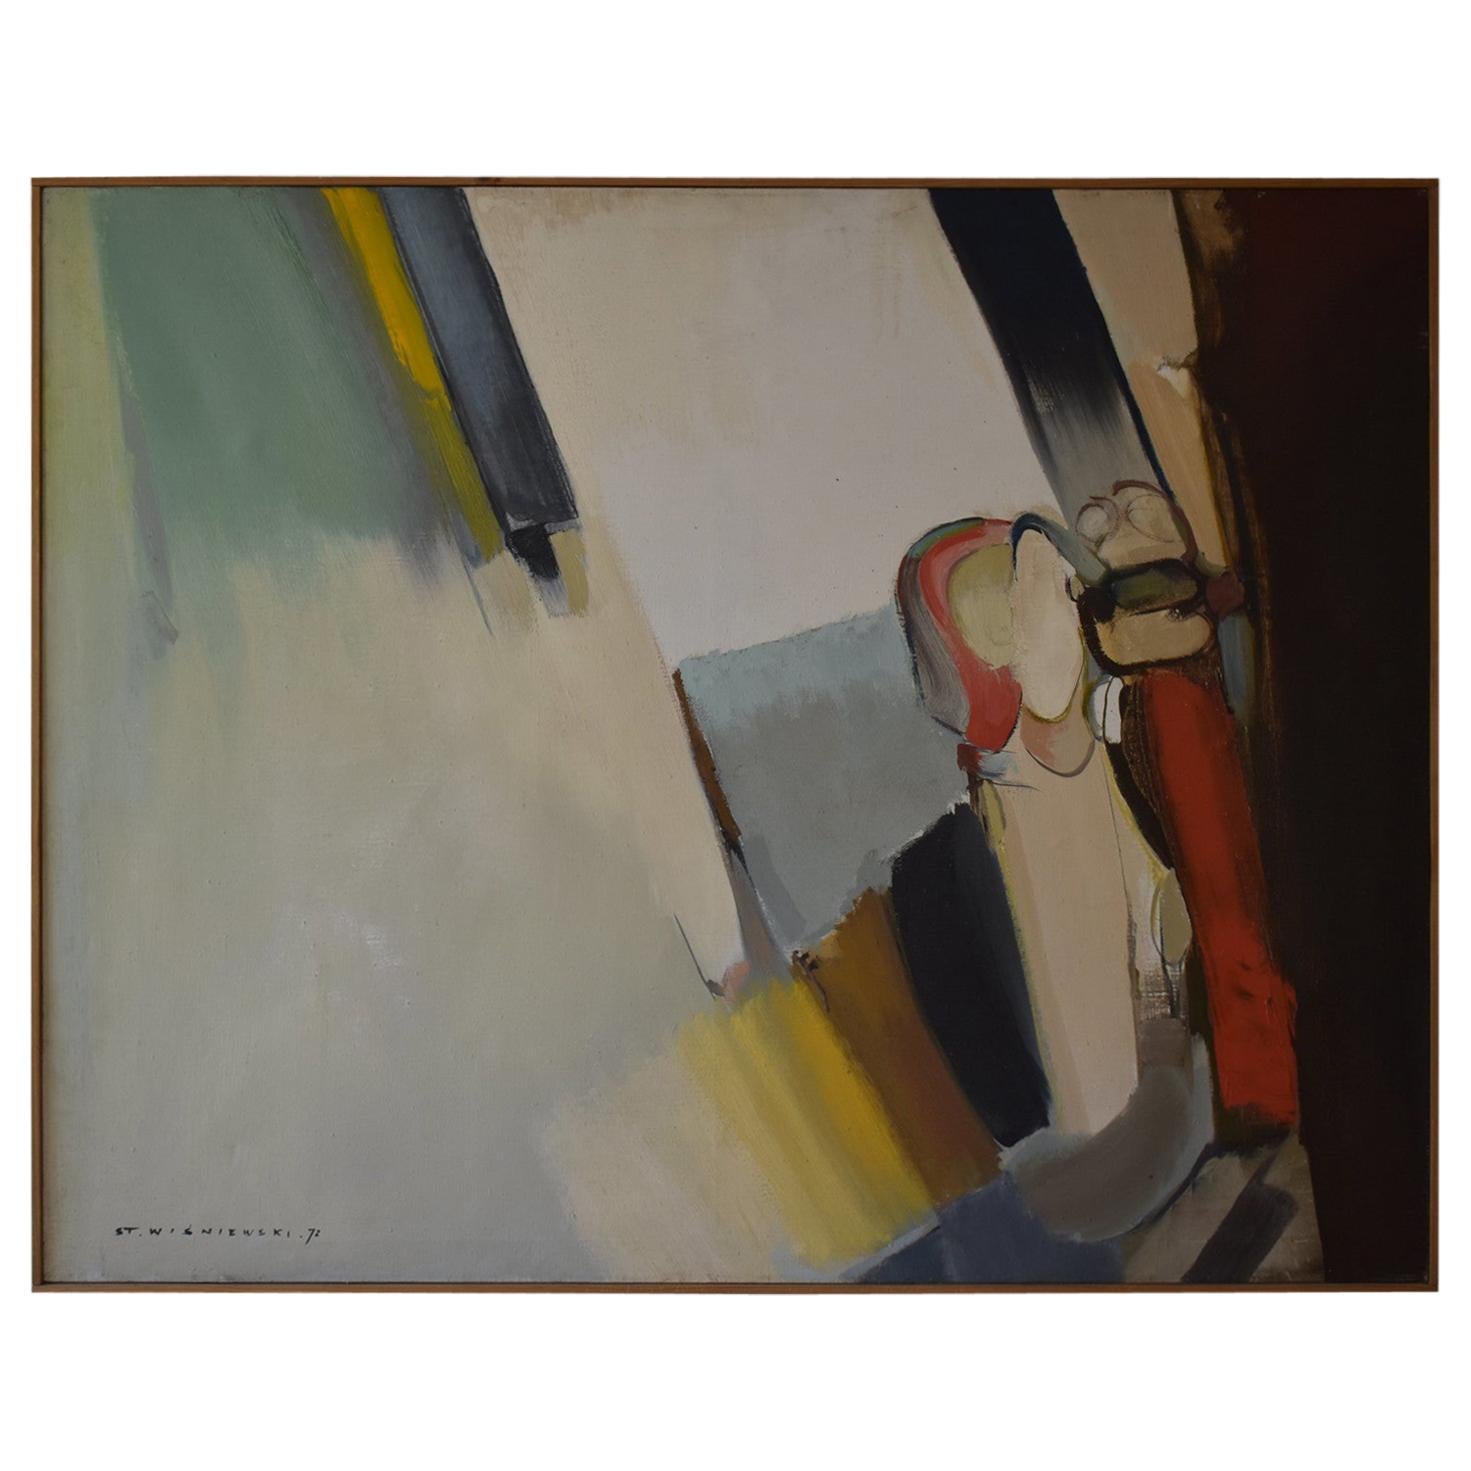 Very Large 1970s Abstract Oil on Canvass by Stanislaw Wisniewski